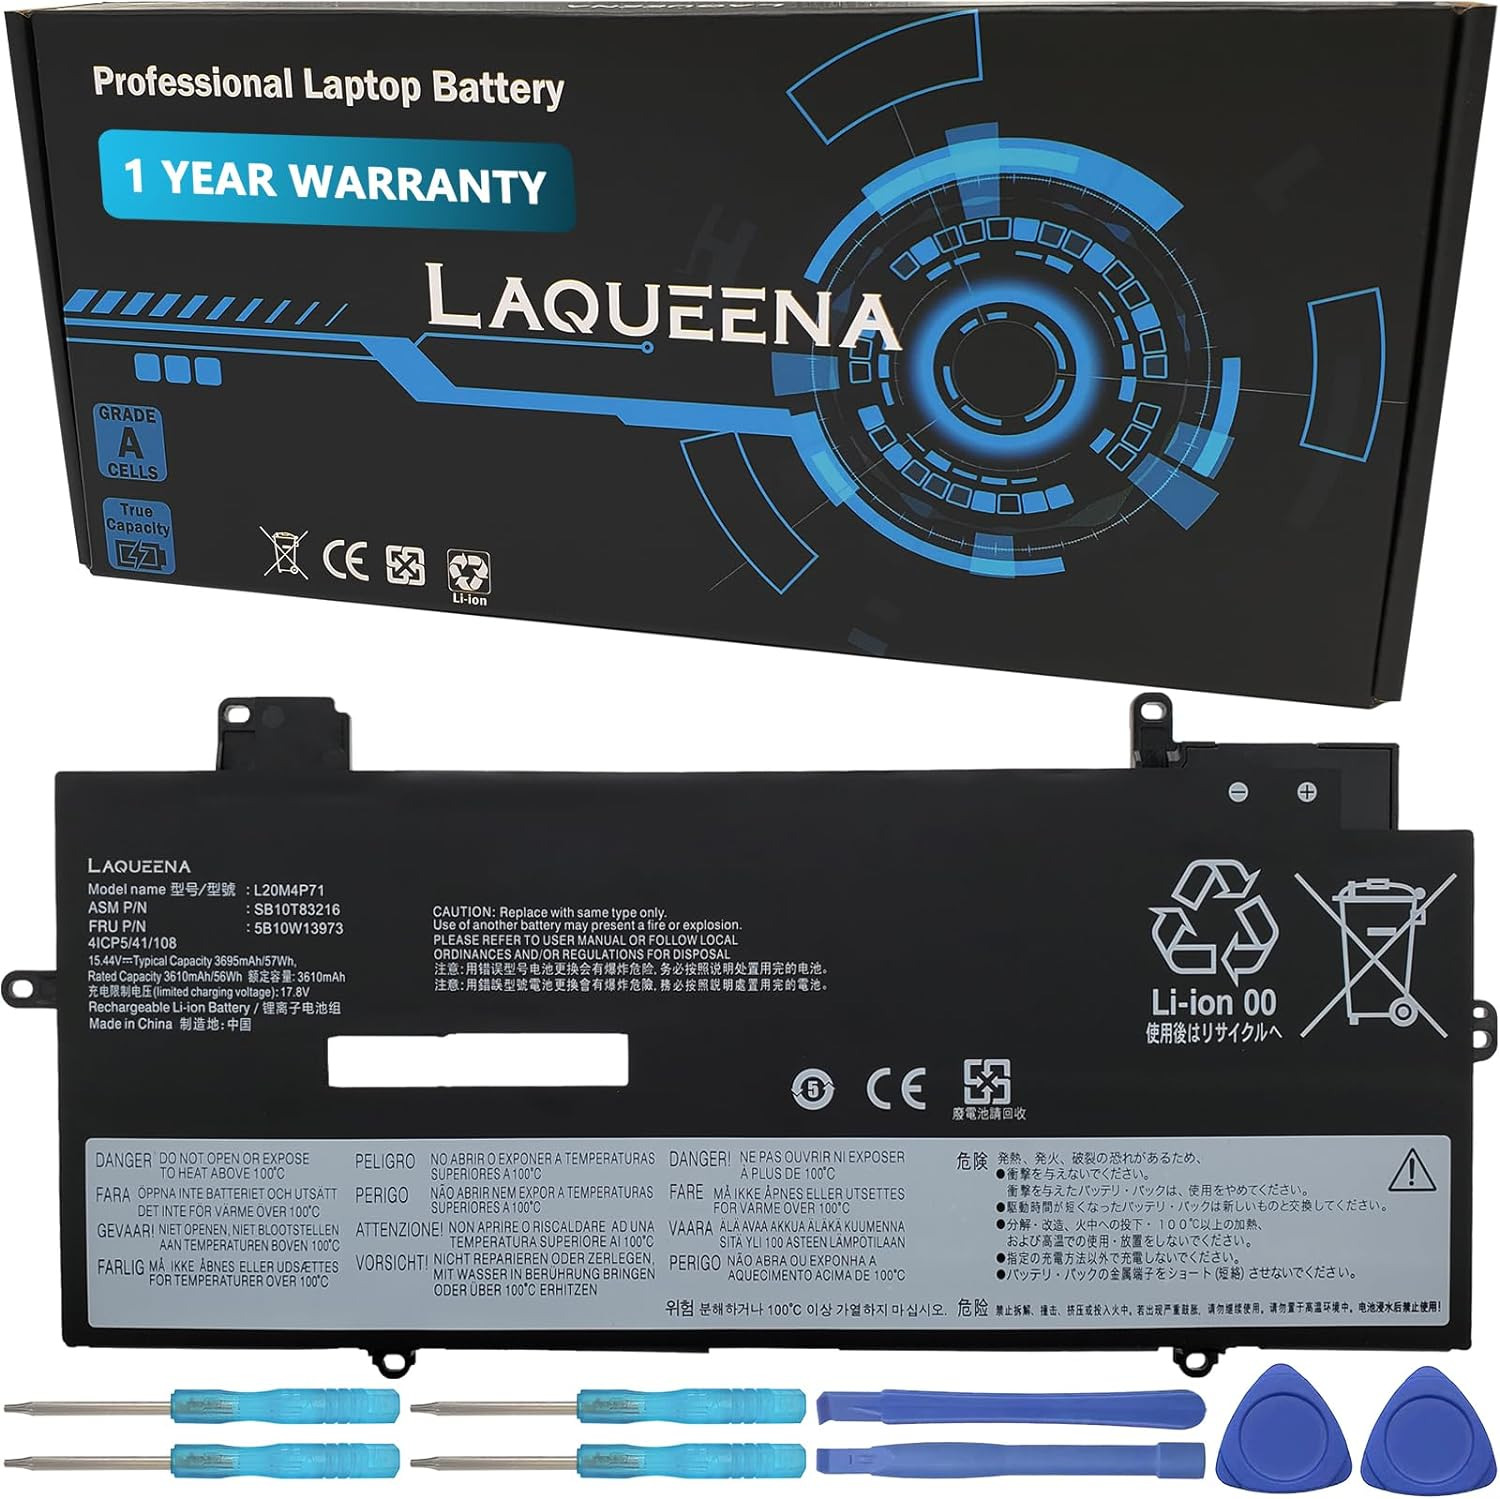 L20M4P71 Laptop Battery Compatible with Lenovo Thinkpad X1 Carbon 9Th 10Th Gen